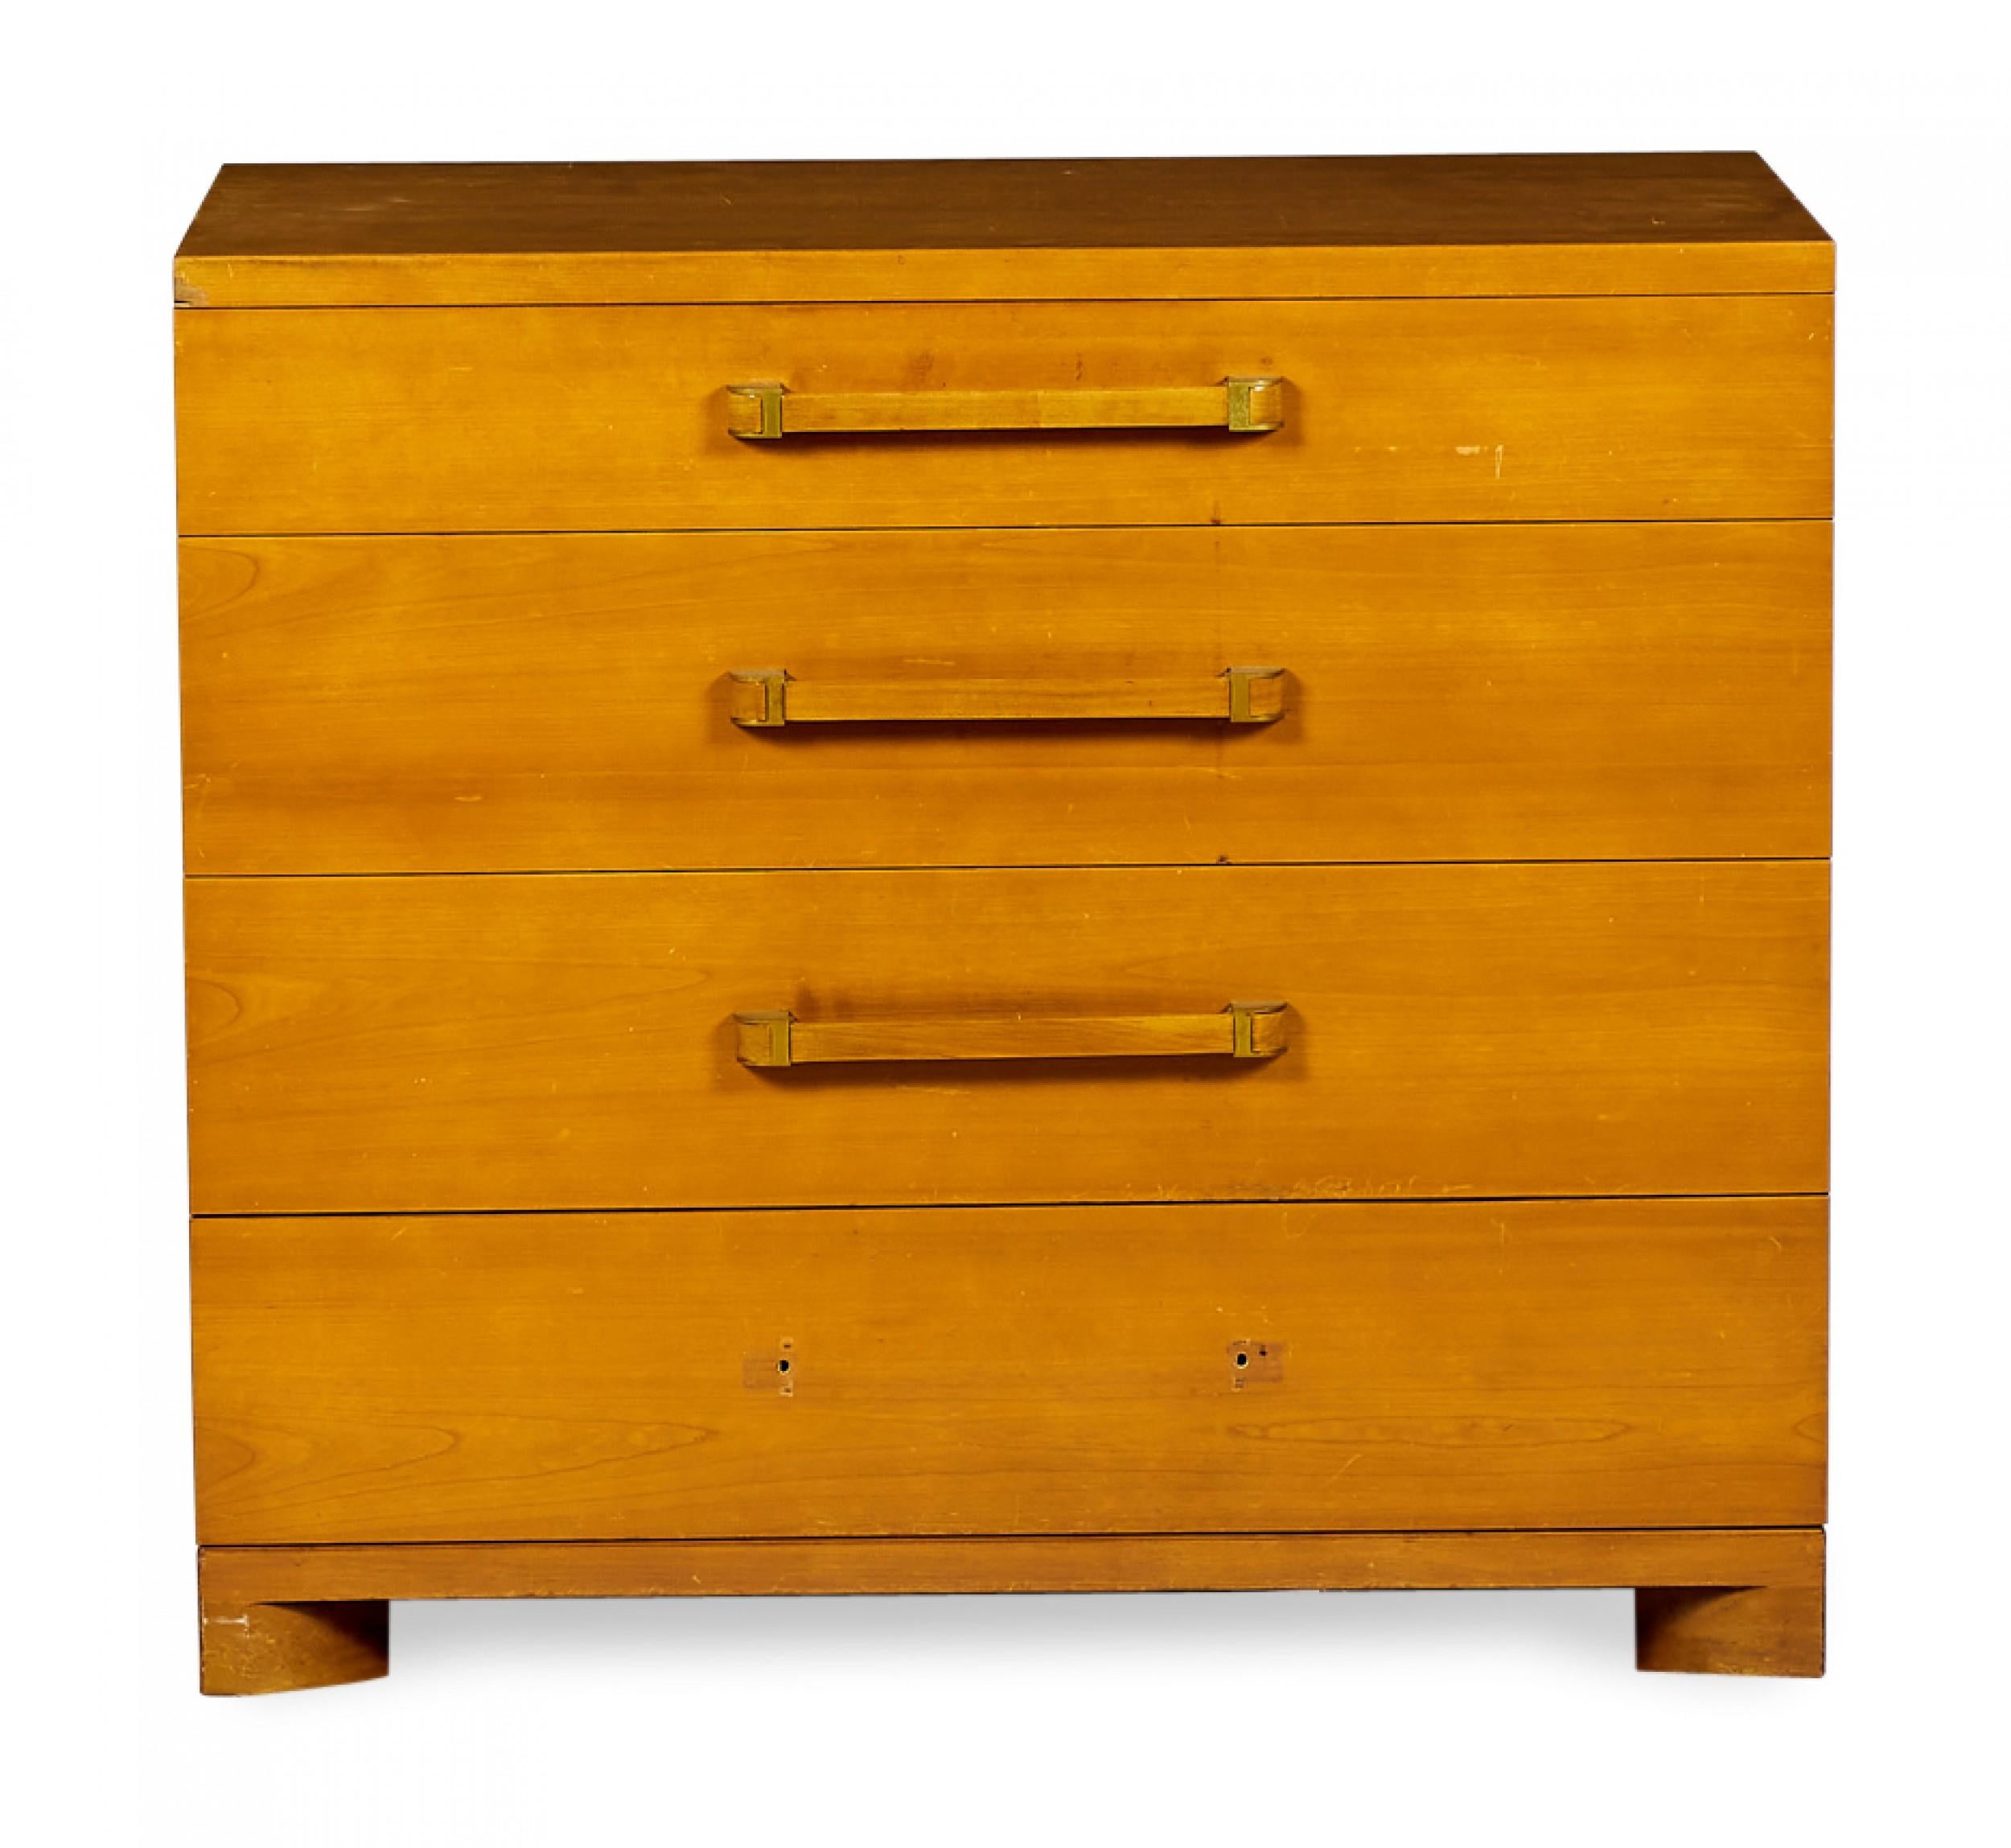 PAIR of American Mid-Century walnut bachelor's chests with four drawers and rectangular wooden drawer pulls resting on four square wooden legs. (JOHN WIDDICOMB)(PRICED AS PAIR)
